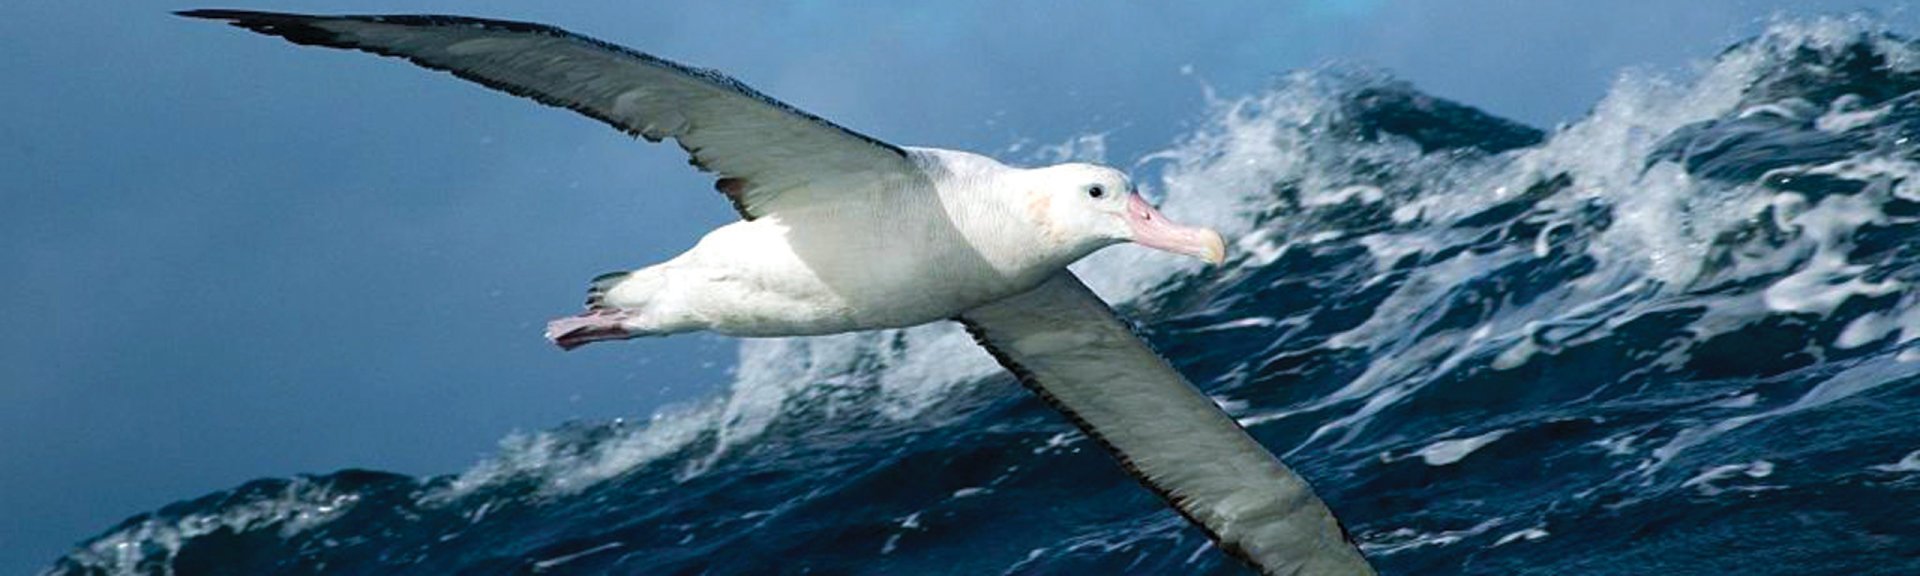 Albatross. Photo by Mike Double